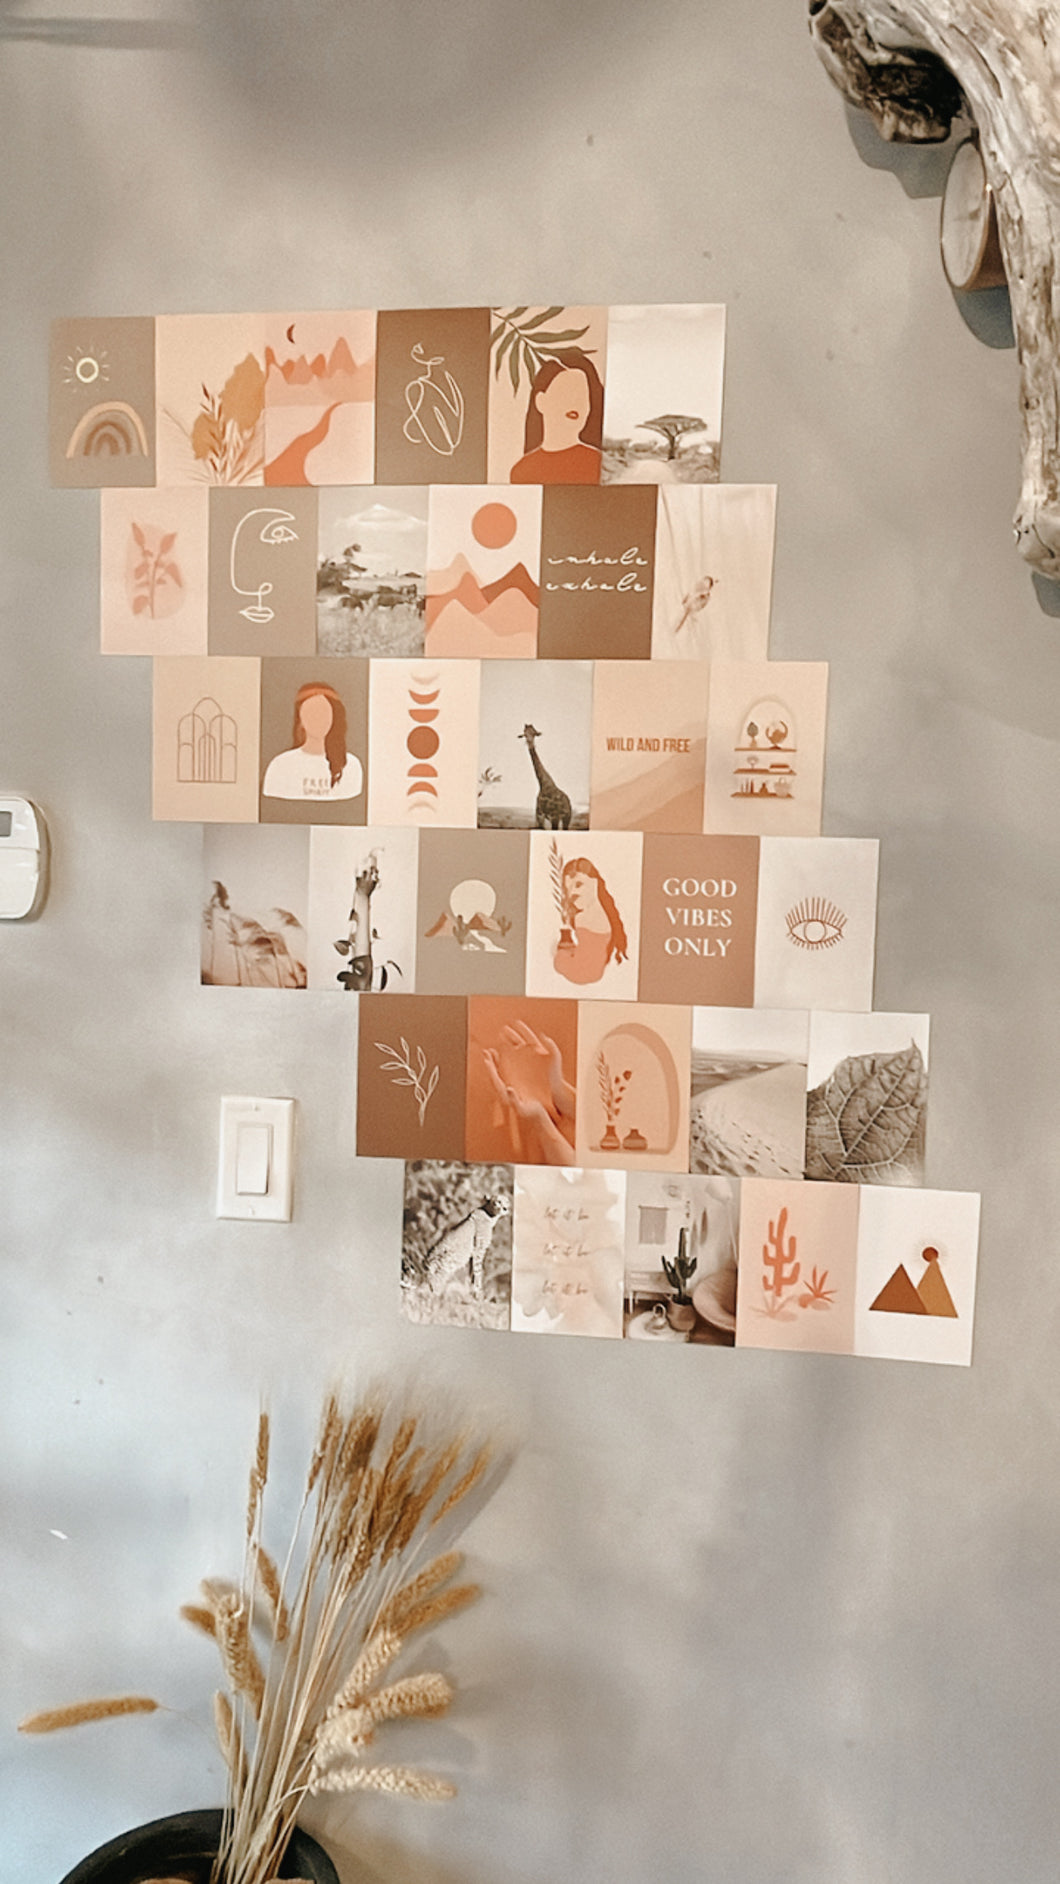 Olico Studio's Wall Collage Cards